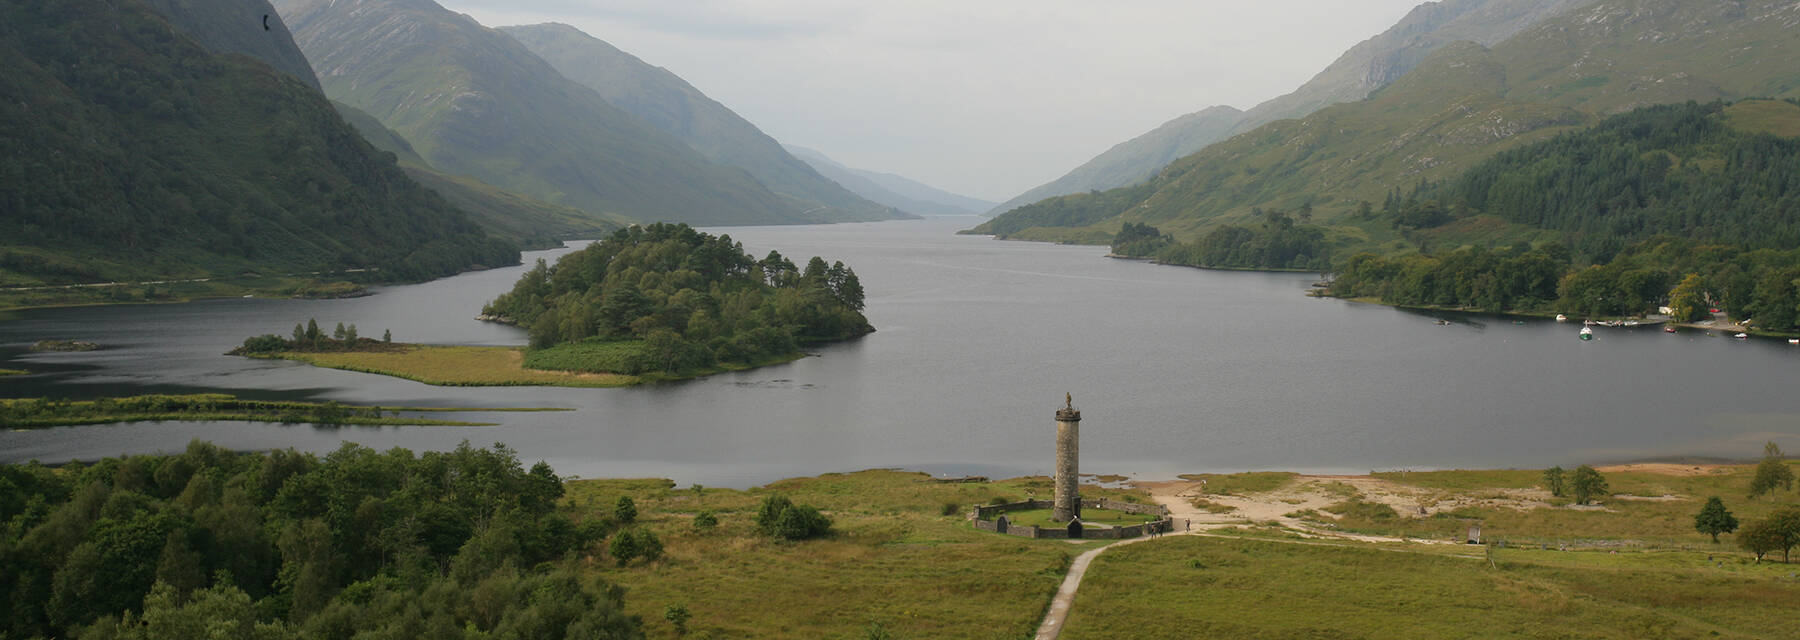 An aerial view of Glenfinnan from the viaduct area, looking down towards the monument at the edge of the loch. The loch and mountains stretch away into the distance.